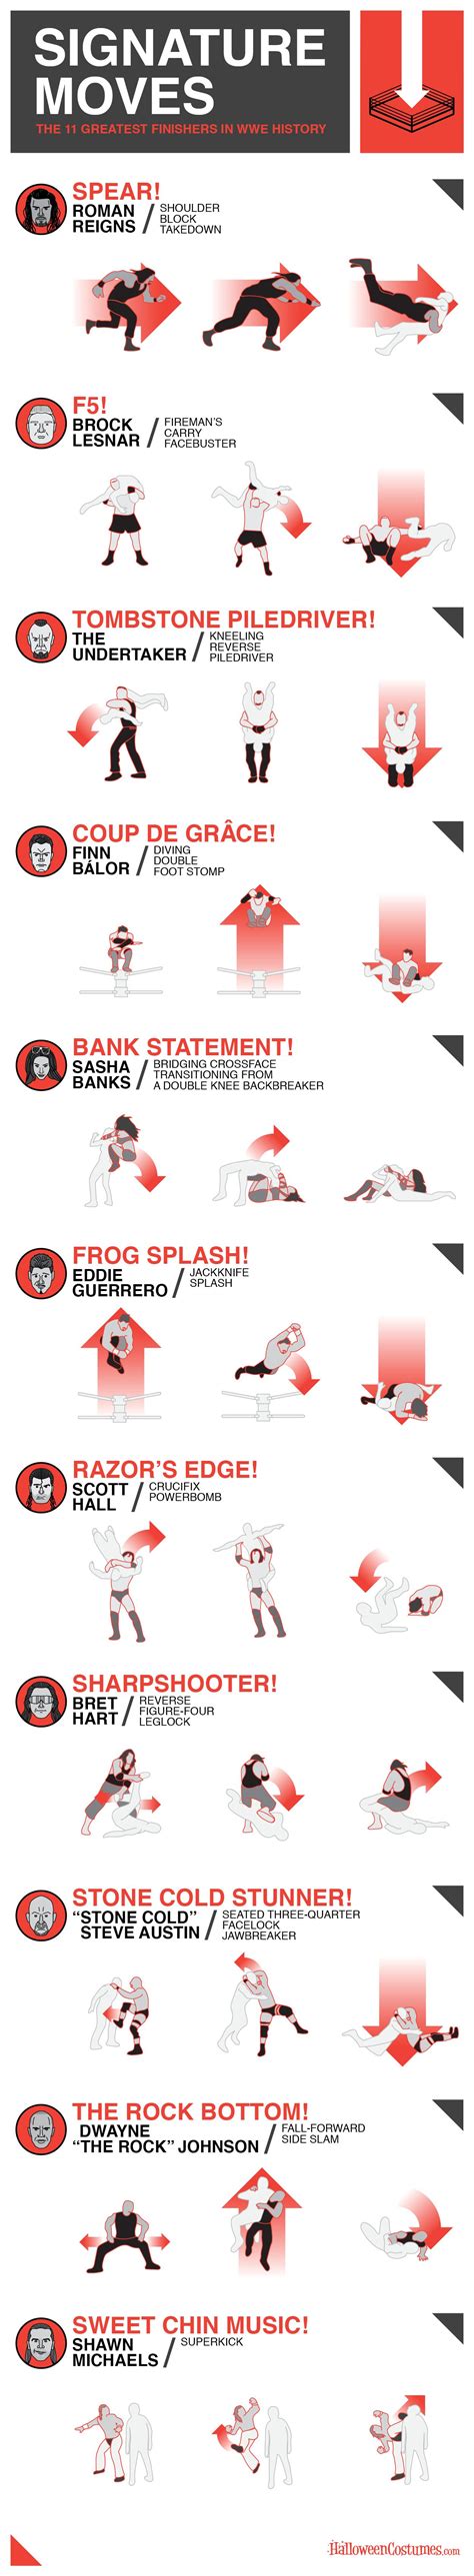 Signature Moves The 11 Greatest Finishers In Wwe History Infographic